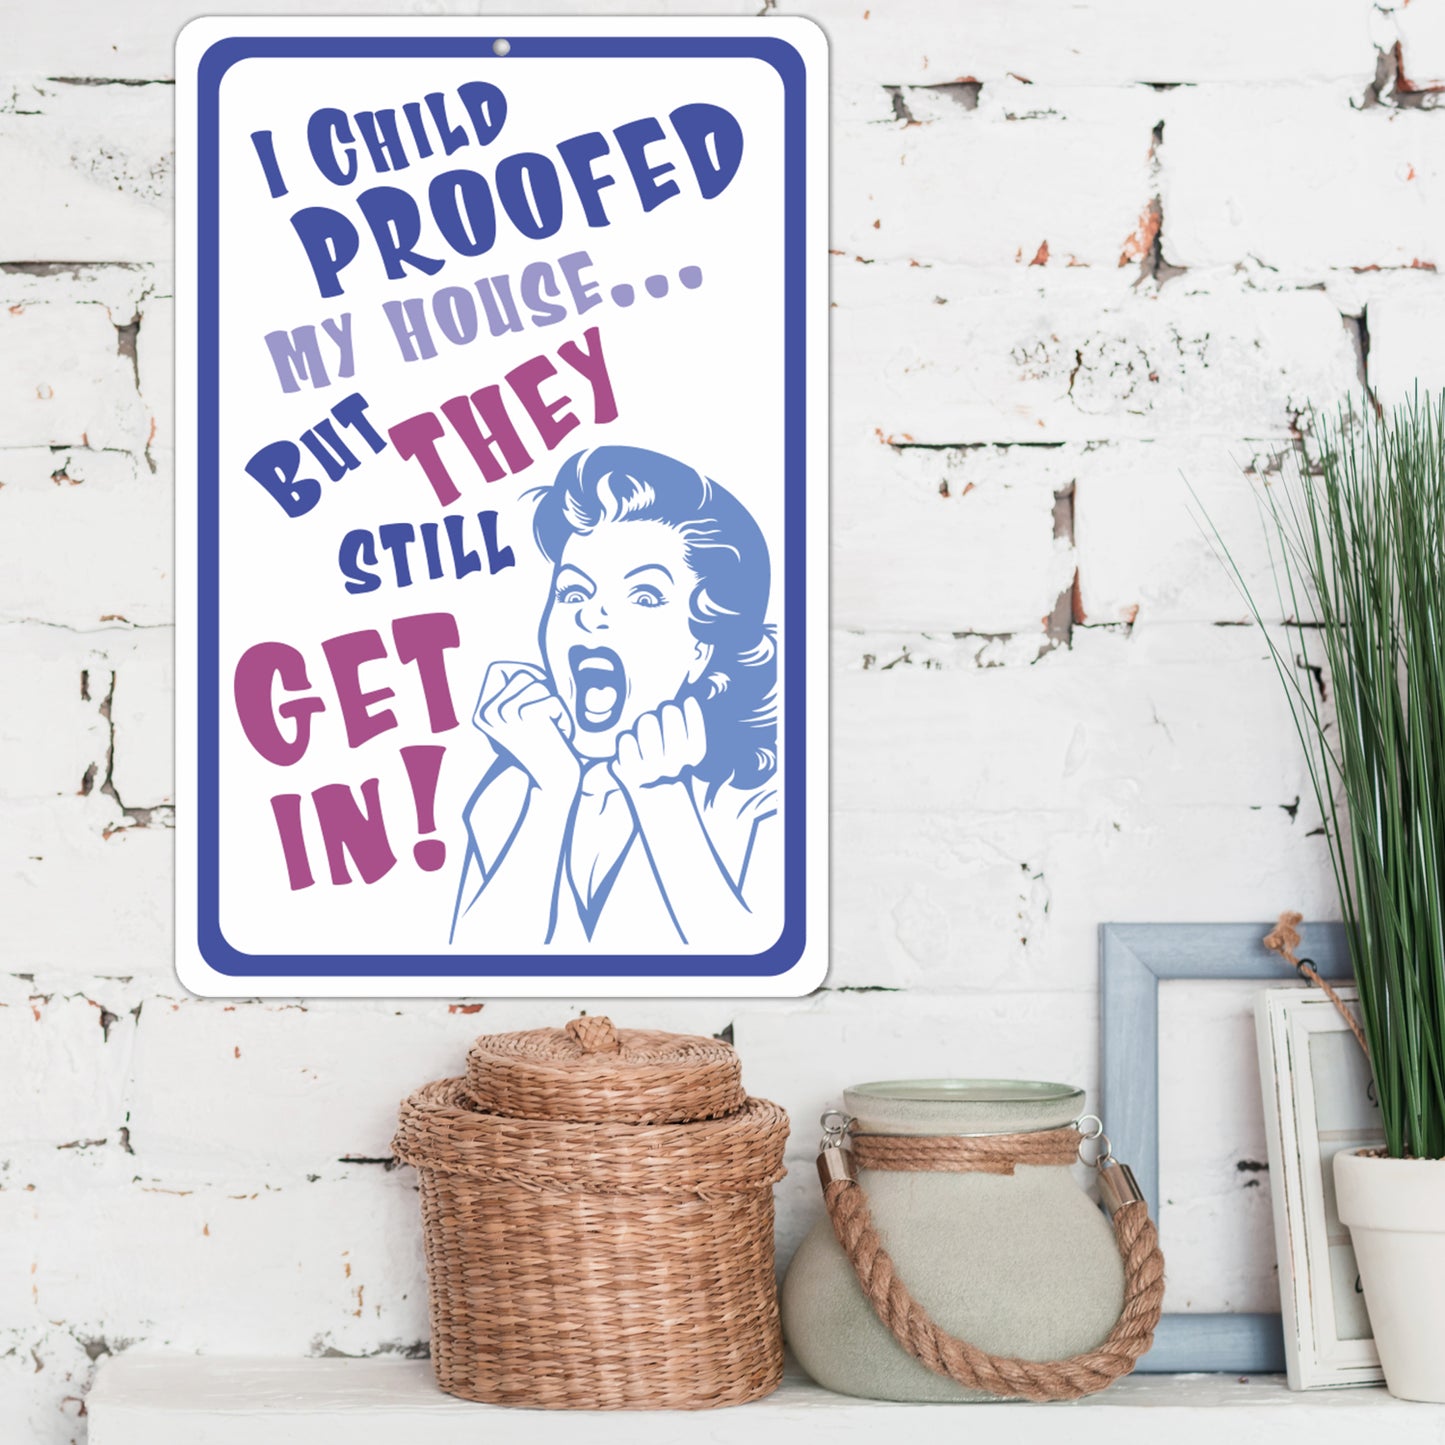 Funny Metal Sign - I Child Proofed My House. but They Still get in! - Size 8 x 12